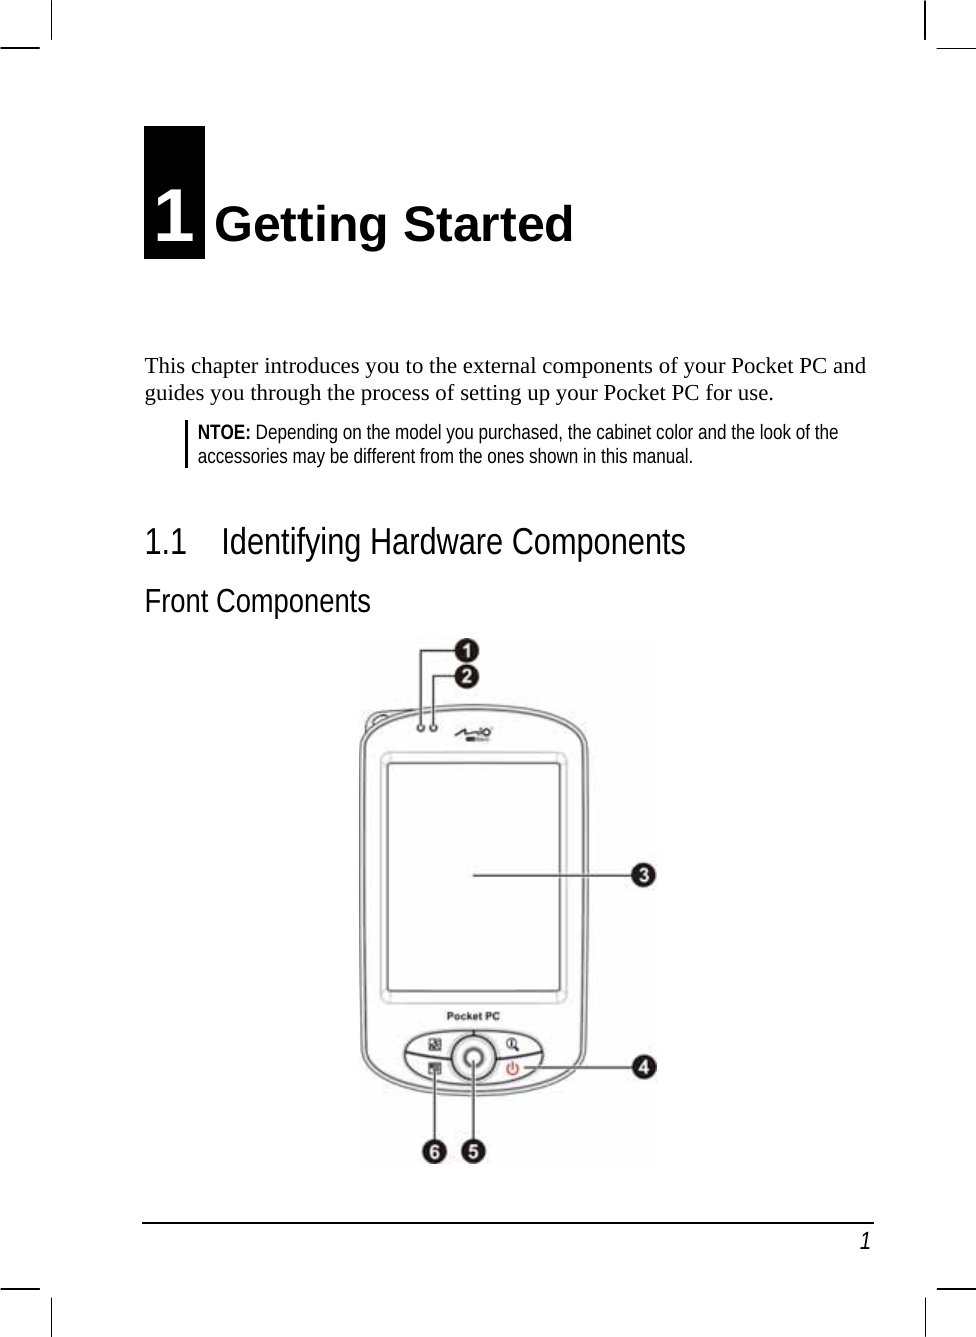   1 1 Getting Started This chapter introduces you to the external components of your Pocket PC and guides you through the process of setting up your Pocket PC for use. NTOE: Depending on the model you purchased, the cabinet color and the look of the accessories may be different from the ones shown in this manual.  1.1 Identifying Hardware Components Front Components  